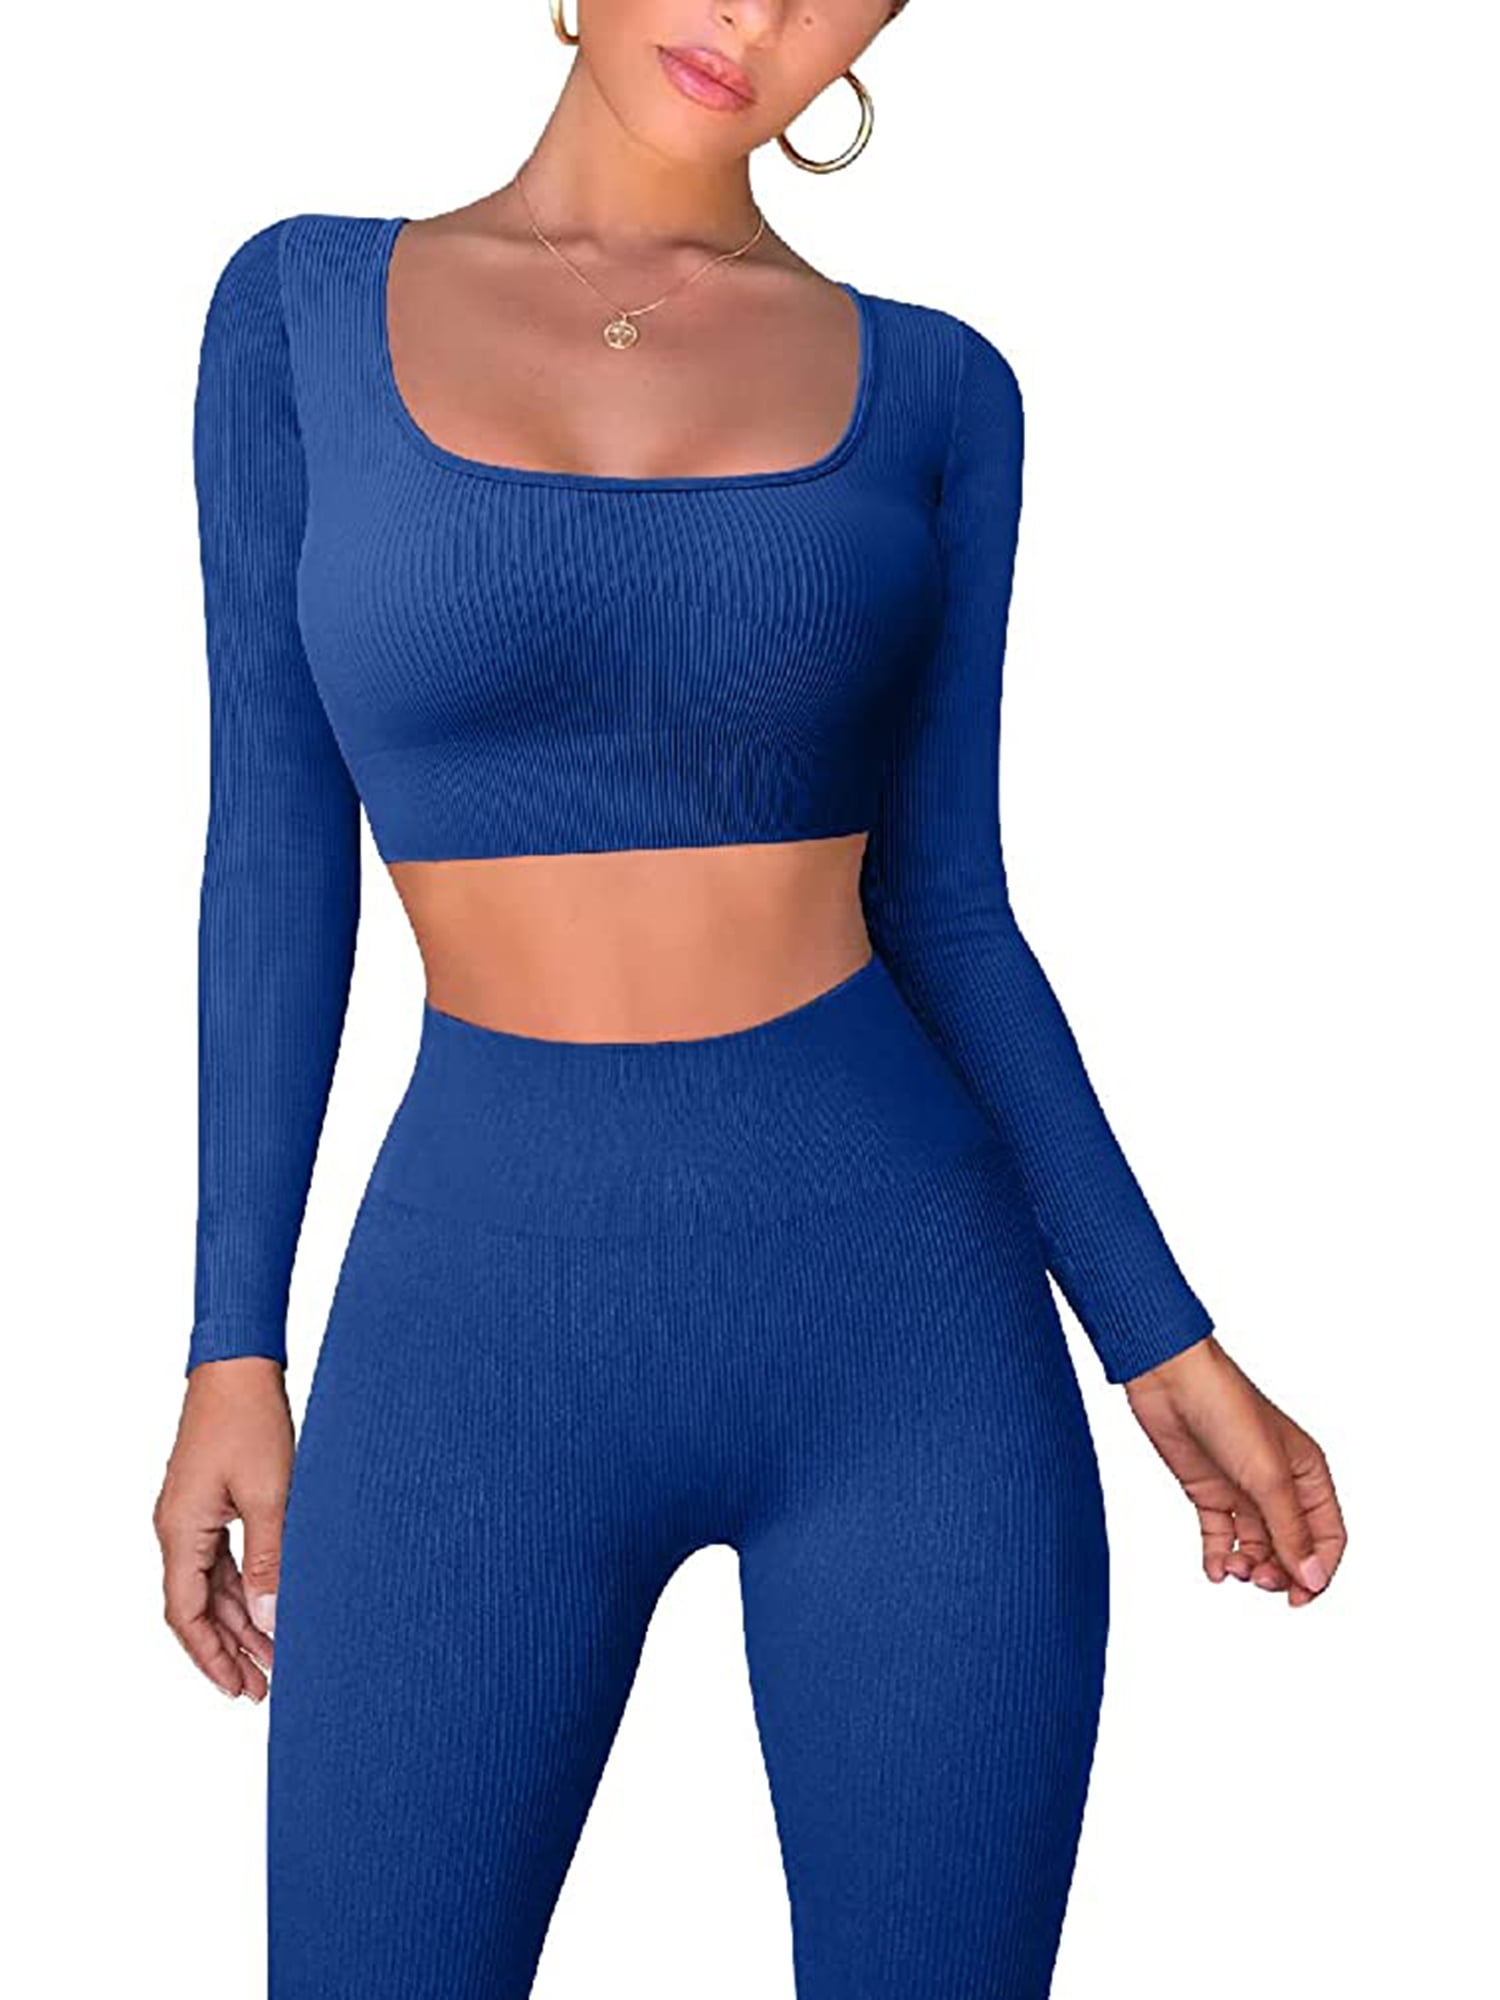 Reflective Womens Tight Tracksuit Set With Zipper Crop Top And Hollow Out  Two Piece Pants Set Designer Patchwork Jogging Outfit From Mant_shirt,  $35.24